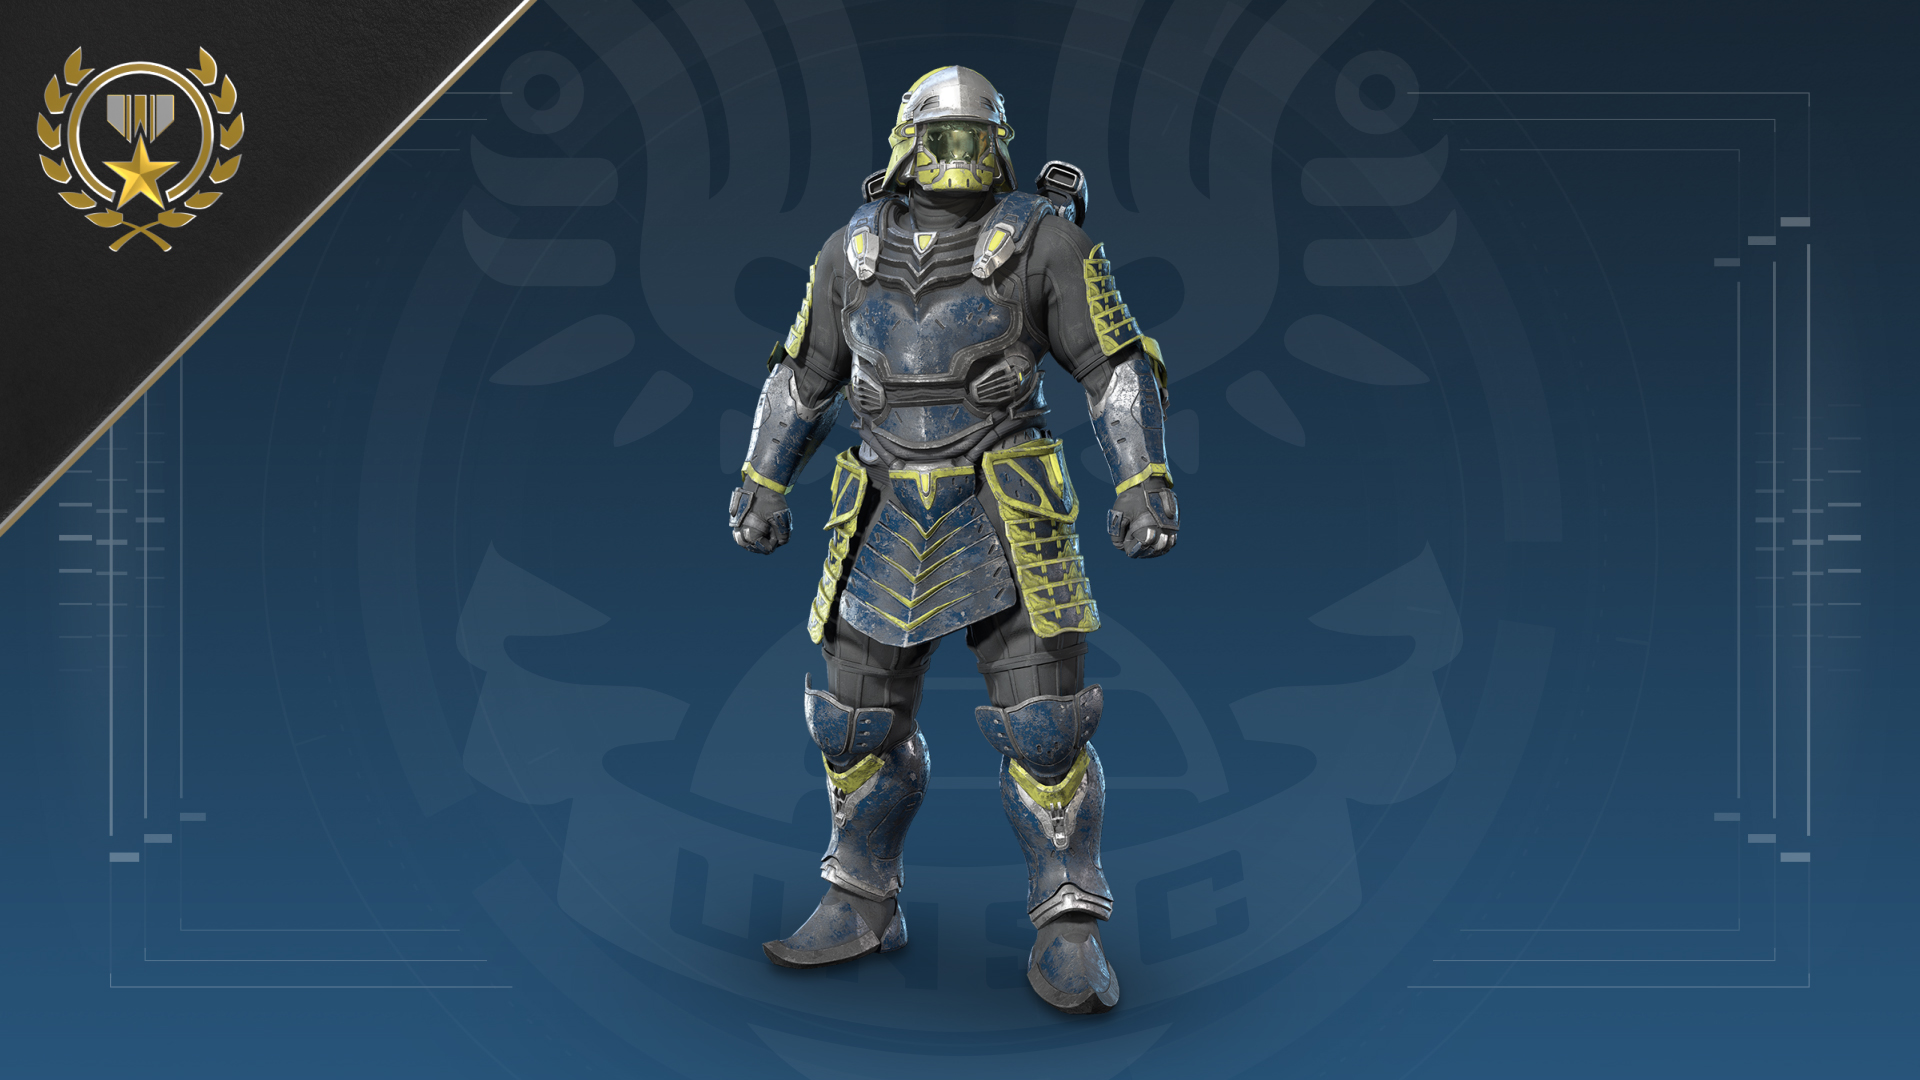 The blue and yellow highlit steel coating for the Yoroi Armor is the ultimate reward. 